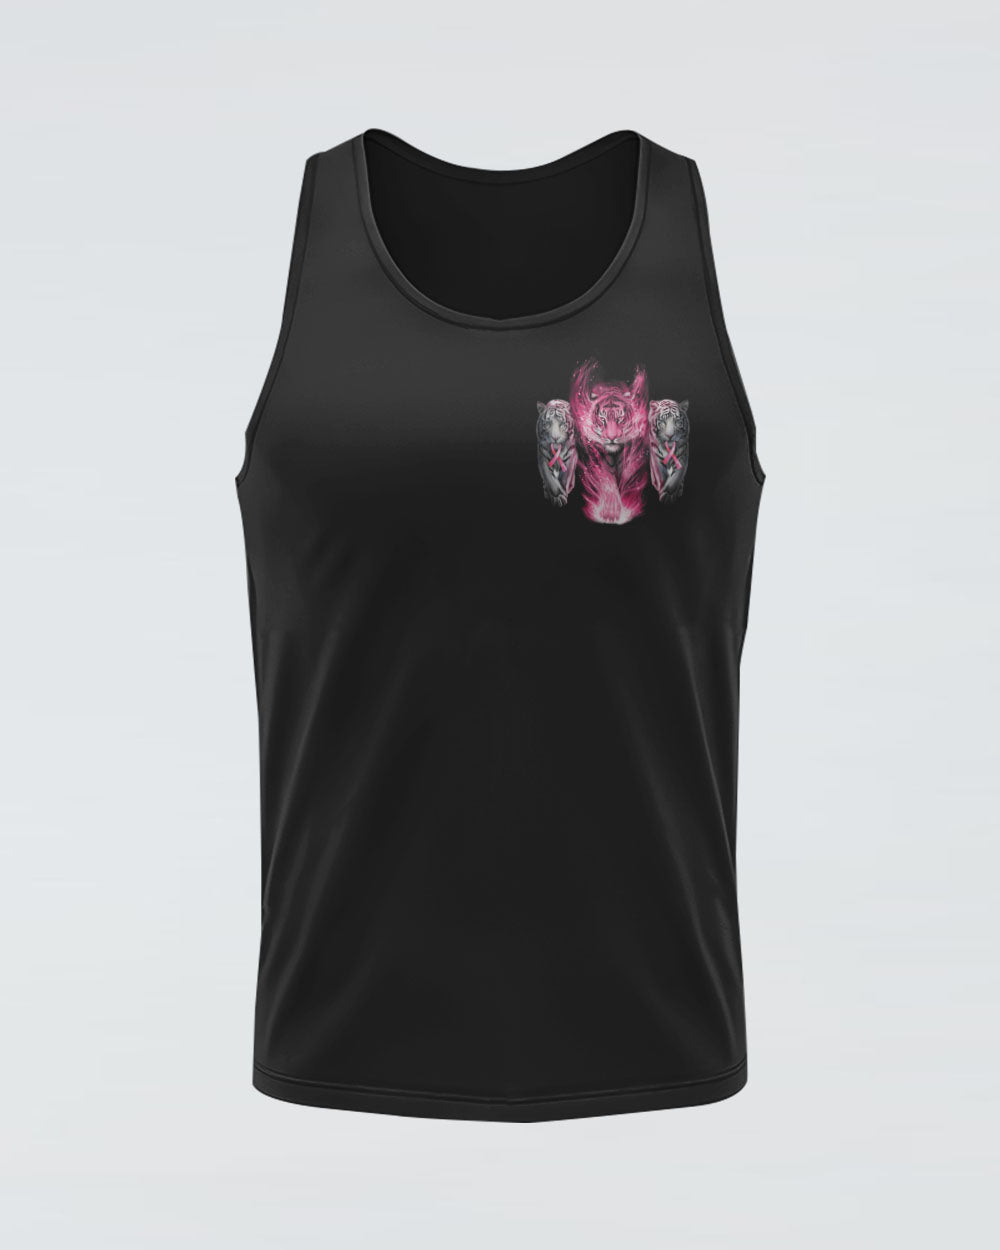 No One Fights Alone Tiger Women's Breast Cancer Awareness Tanks